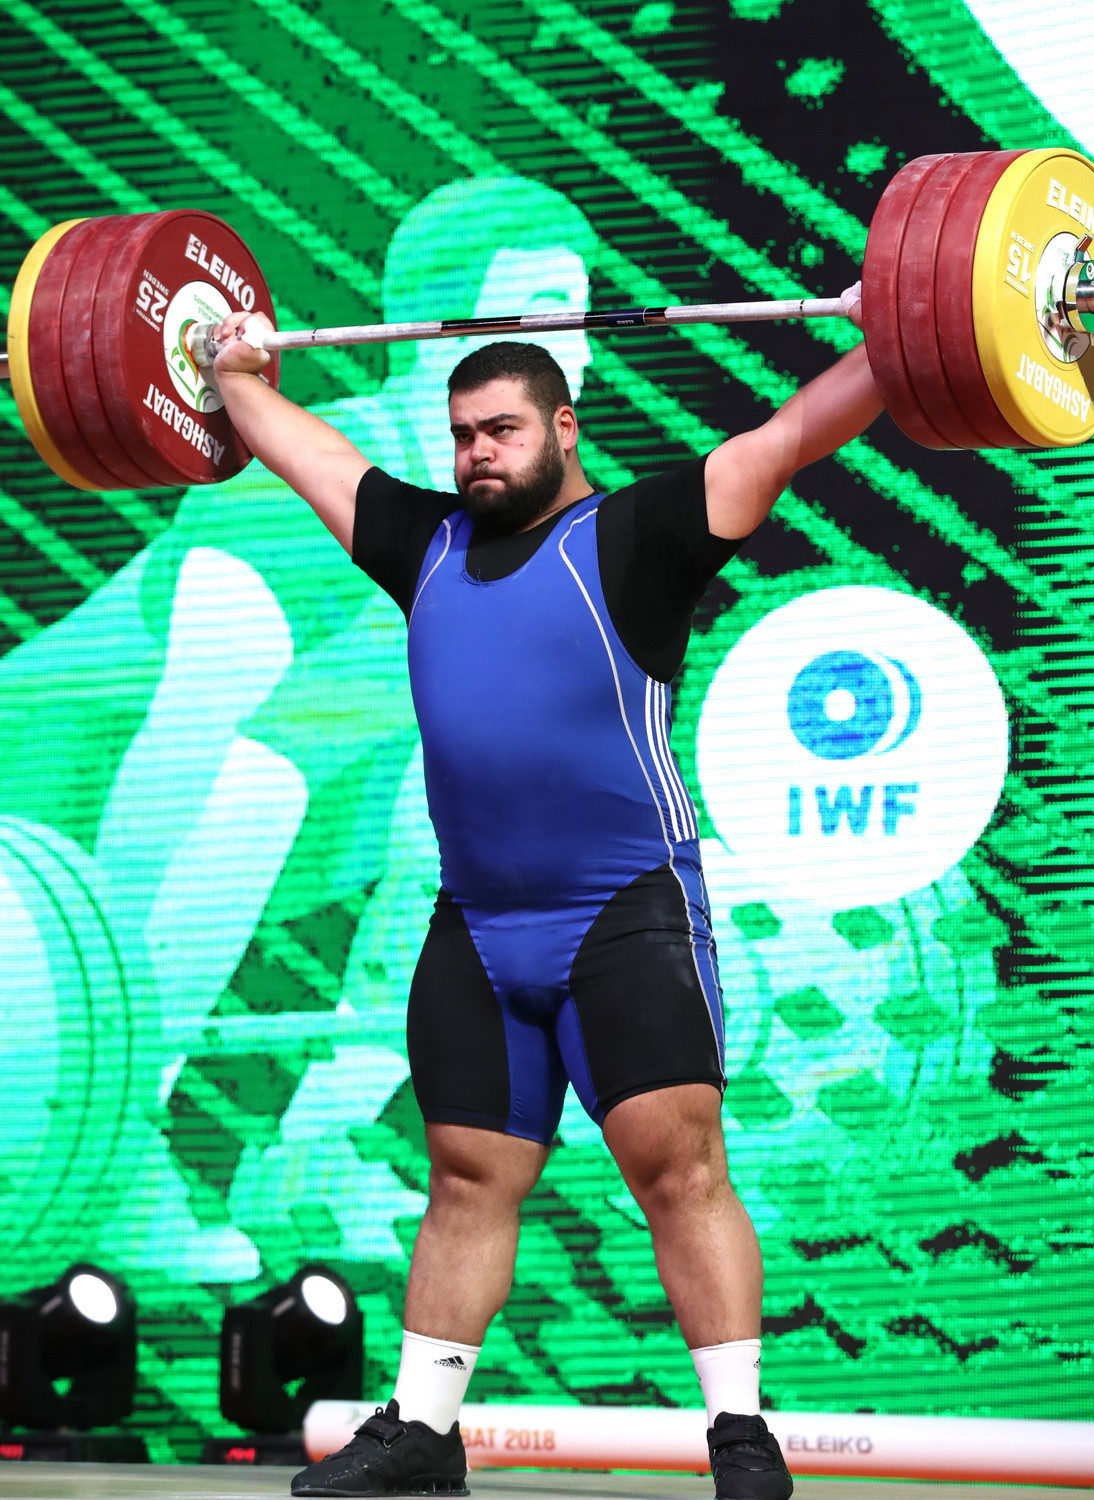 He triumphed by a margin of 24kg over nearest challenger Gor Minasyan of Armenia in the total ©IWF